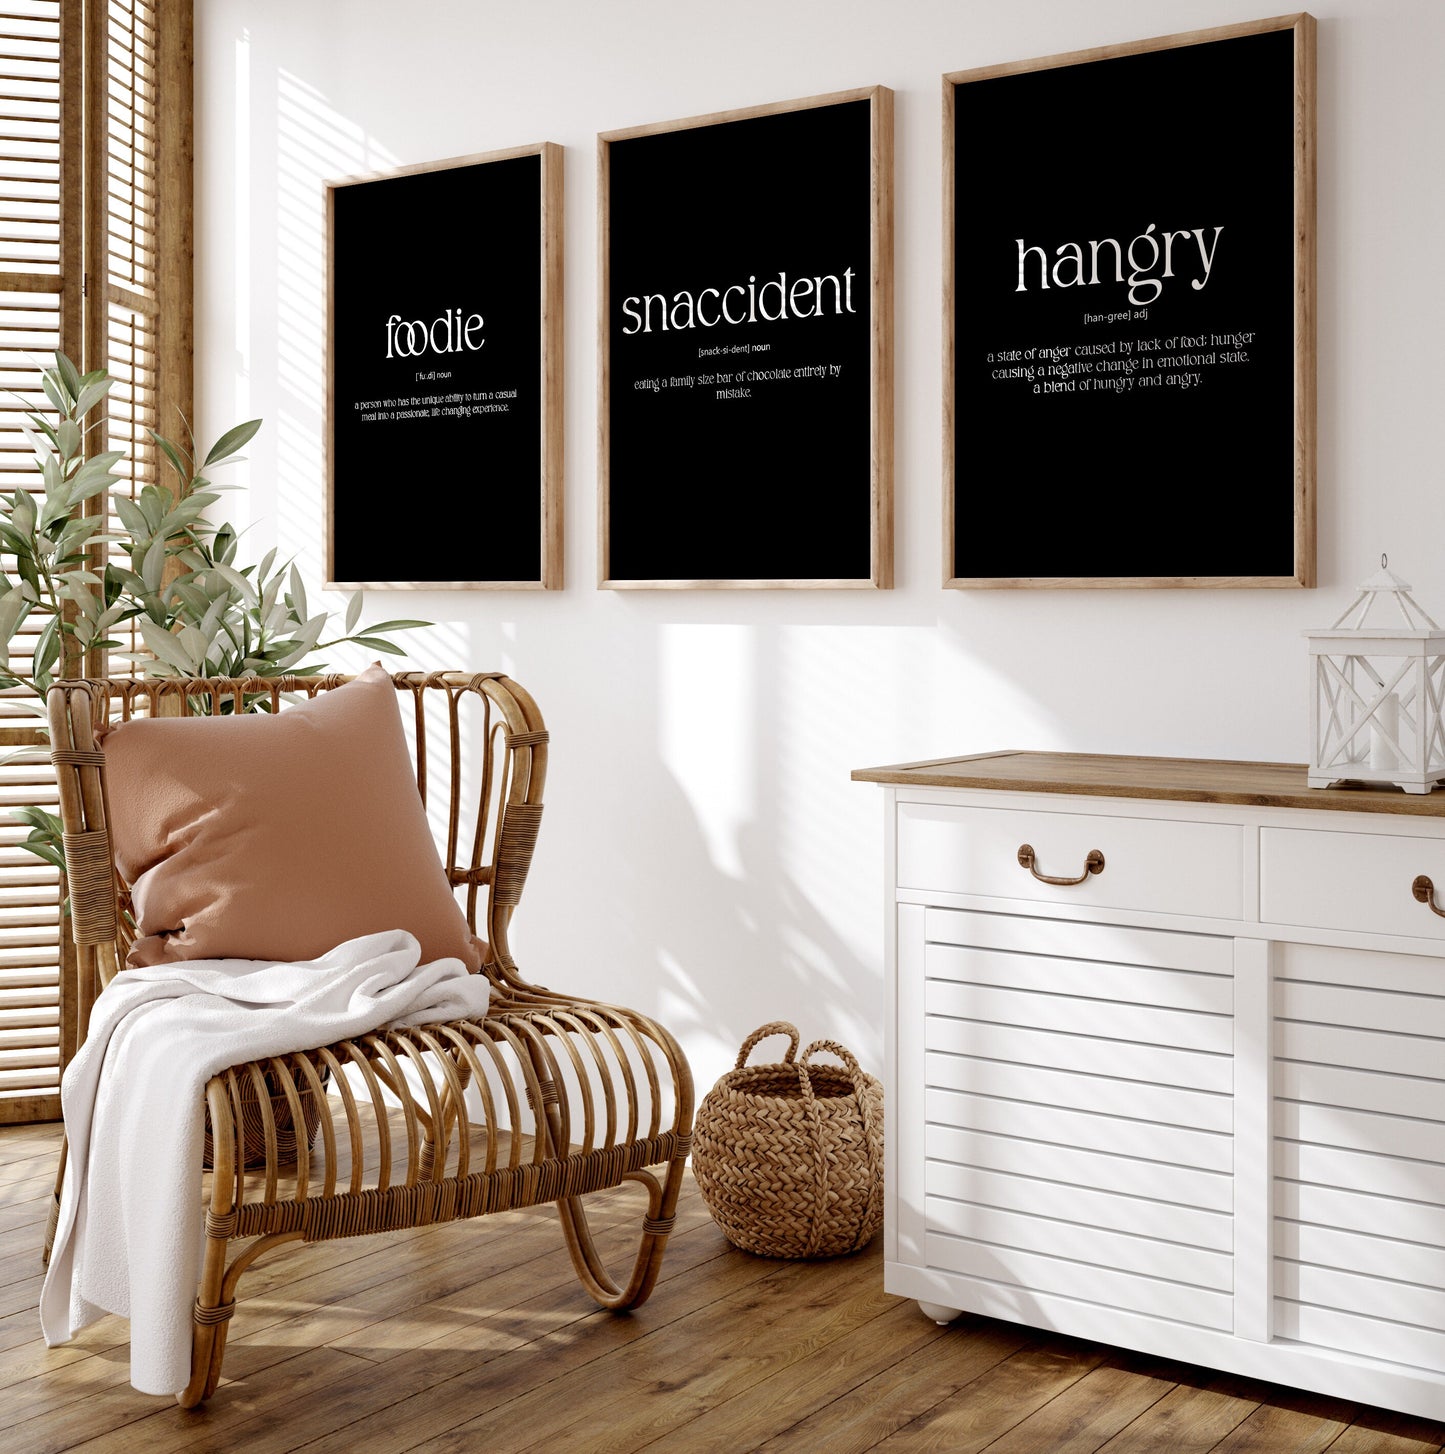 Foodie, Snaccident, Hangry Set Of 3 Definition Prints - Magic Posters